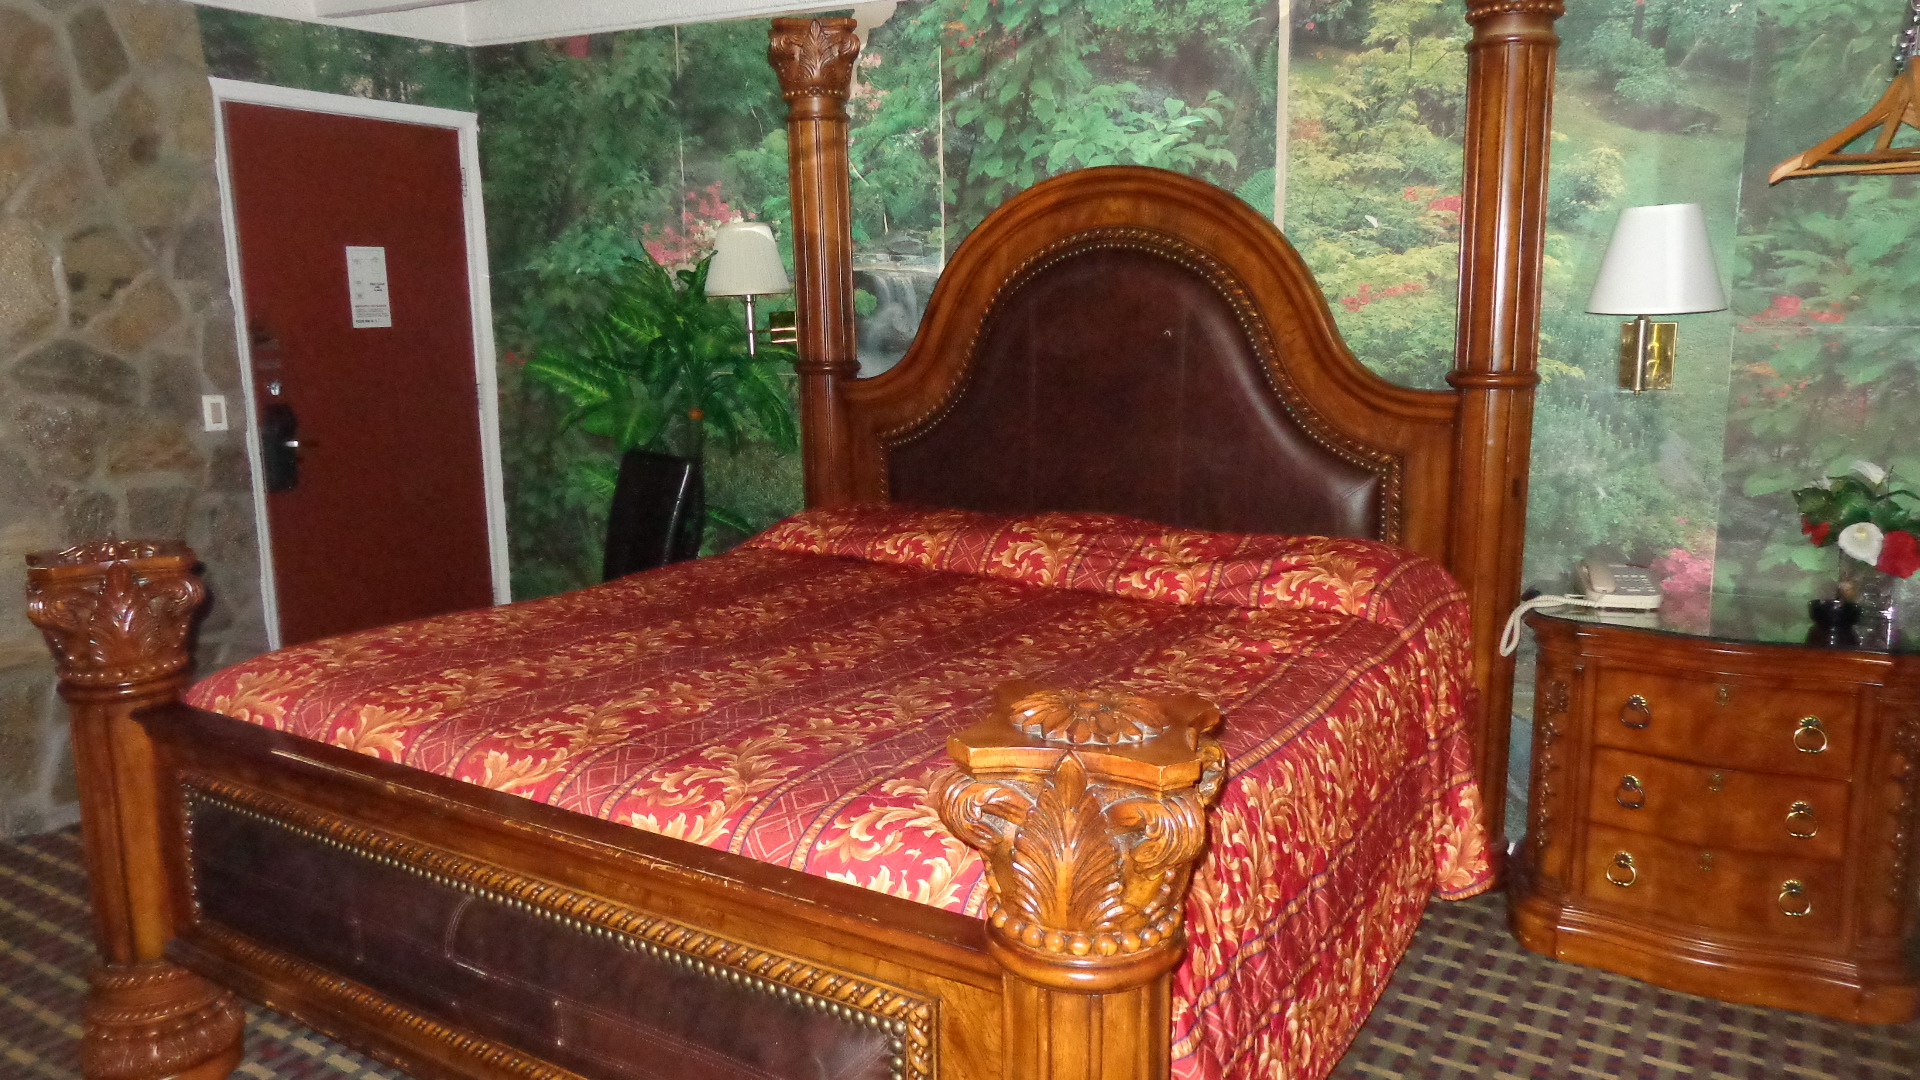 King Bed Room at Edgewood Motel in NY